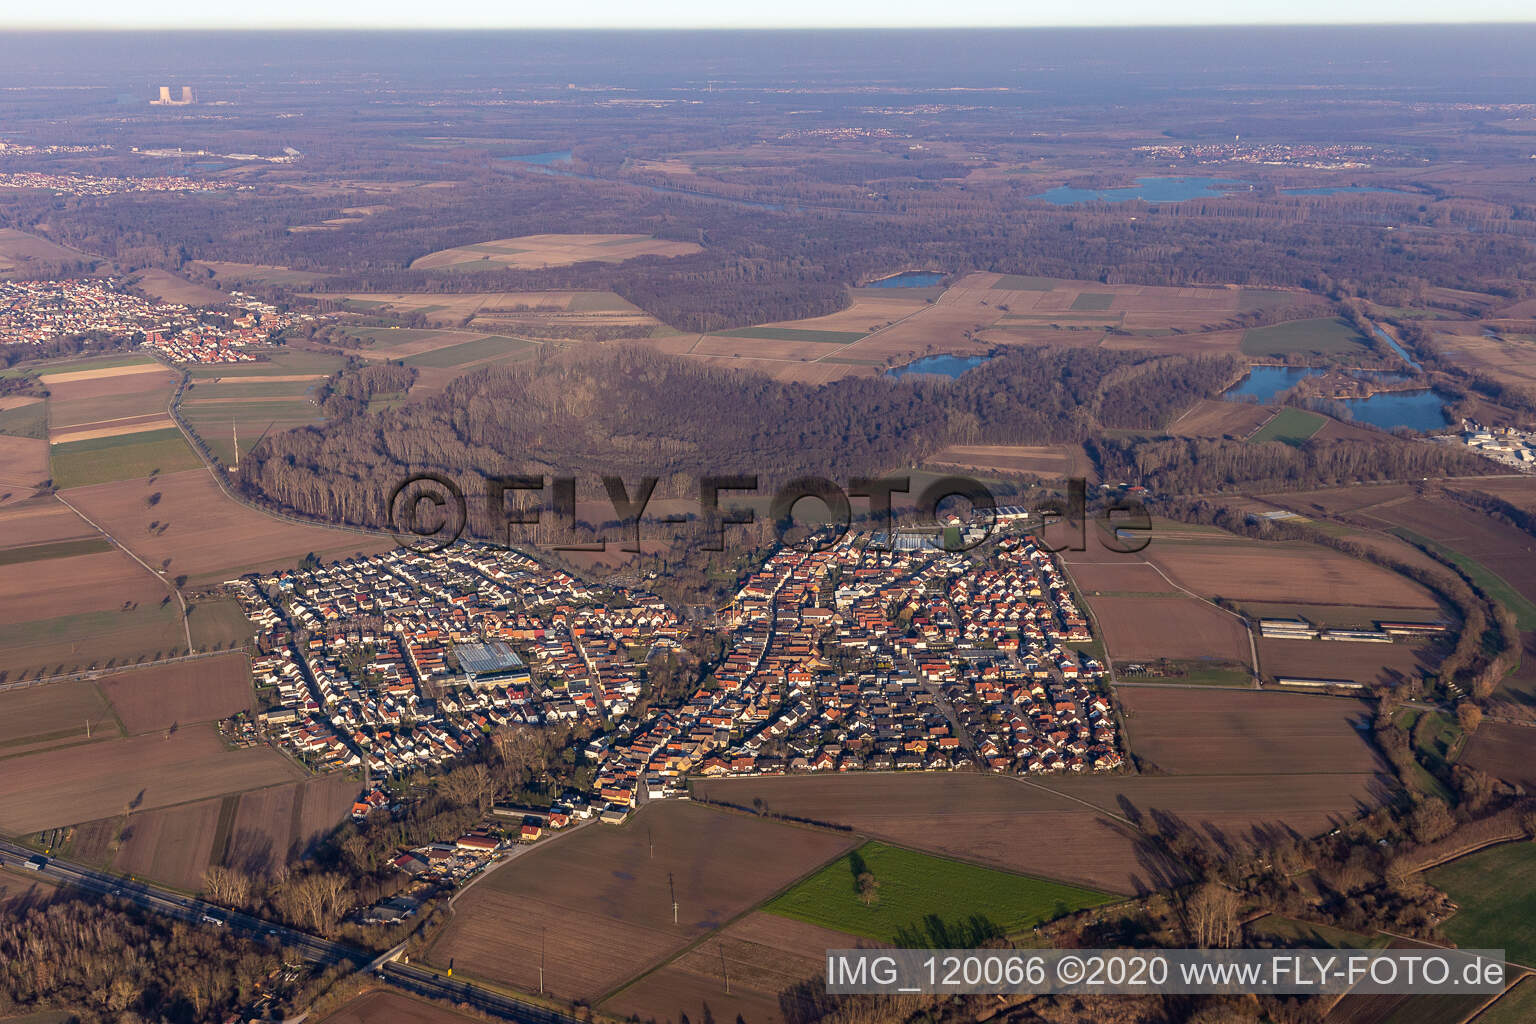 Bird's eye view of Kuhardt in the state Rhineland-Palatinate, Germany